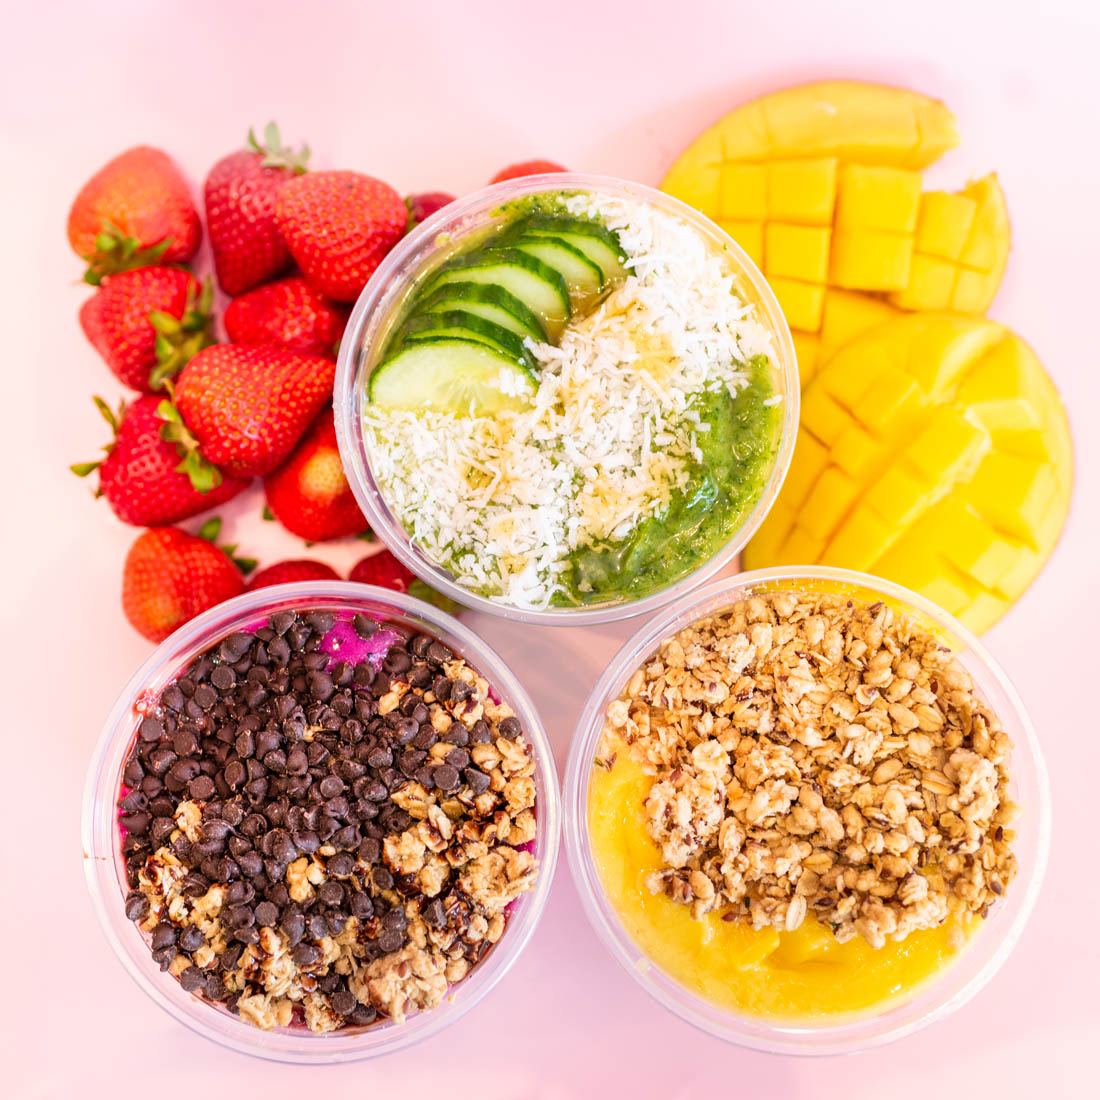 Rush Bowls smoothie bowls nutrition info in Boulder.